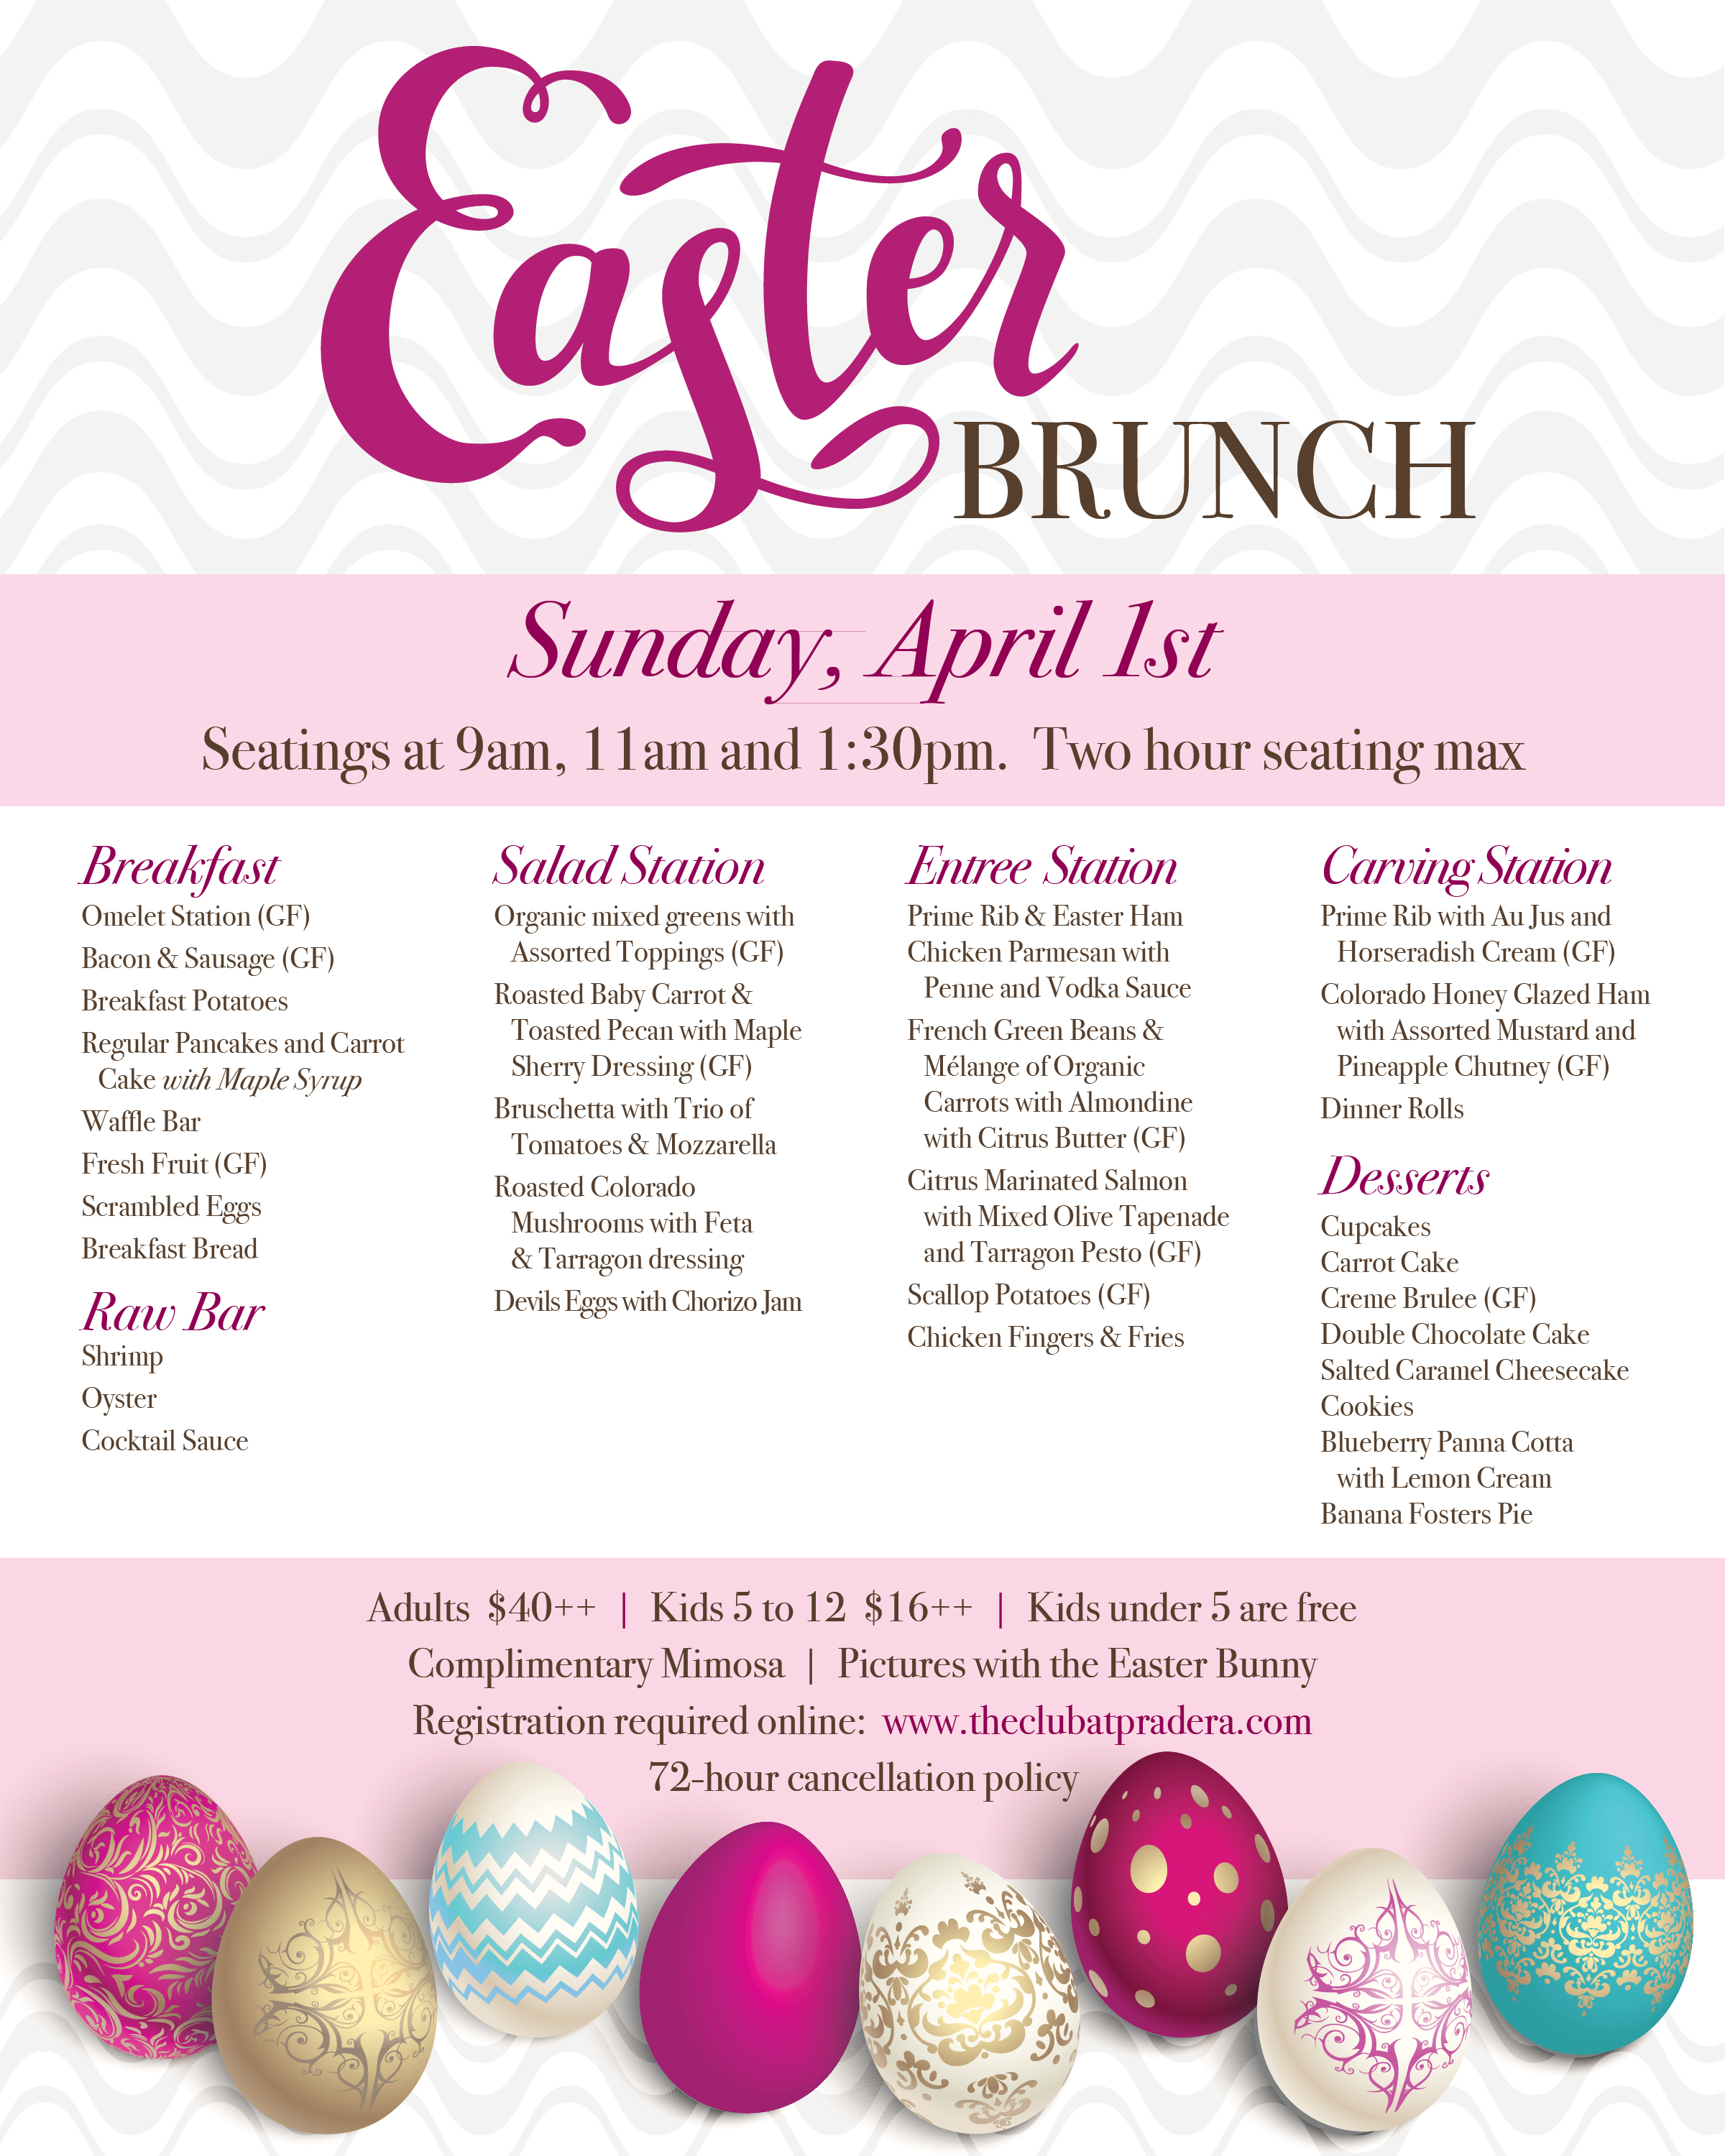 Champagne Easter Brunch | The Club at Pradera | 2018-04-01